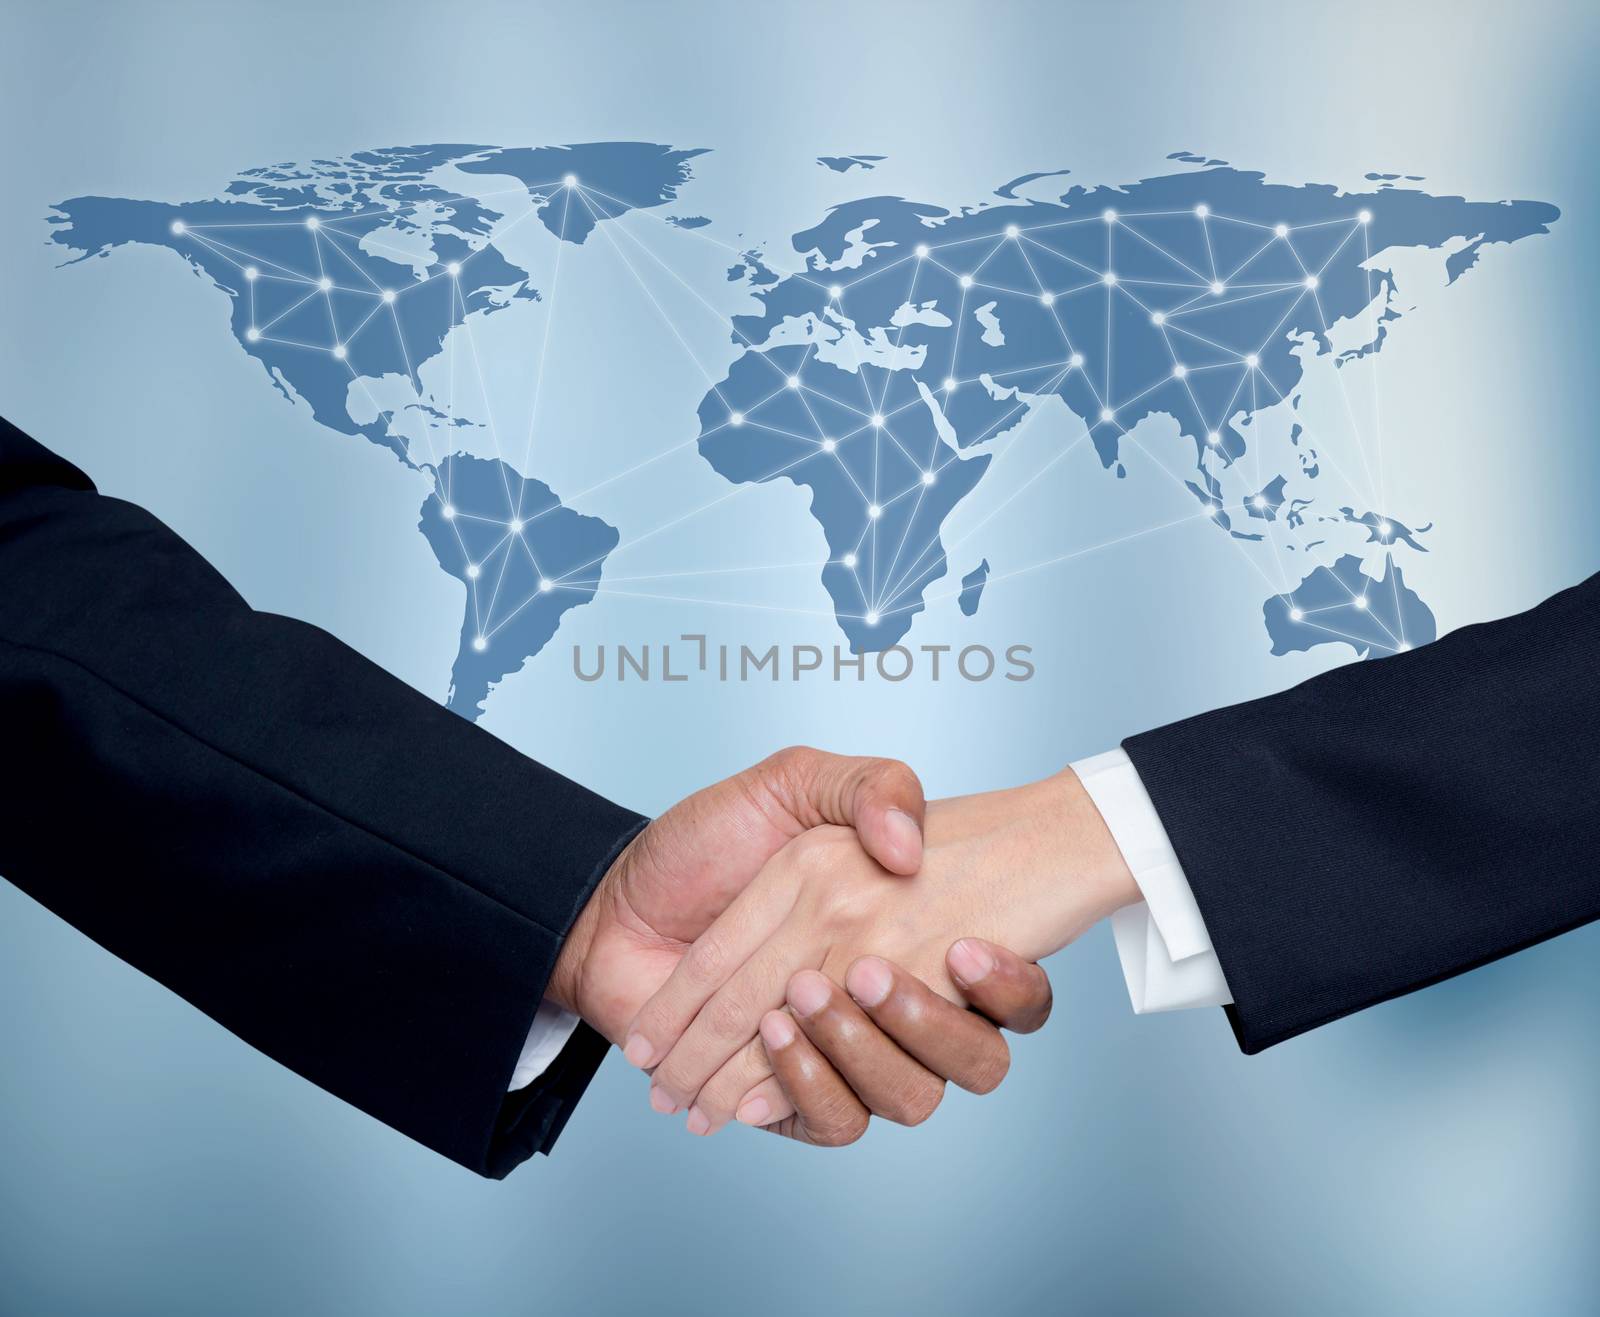 Business with people shaking hands with a global communication network background